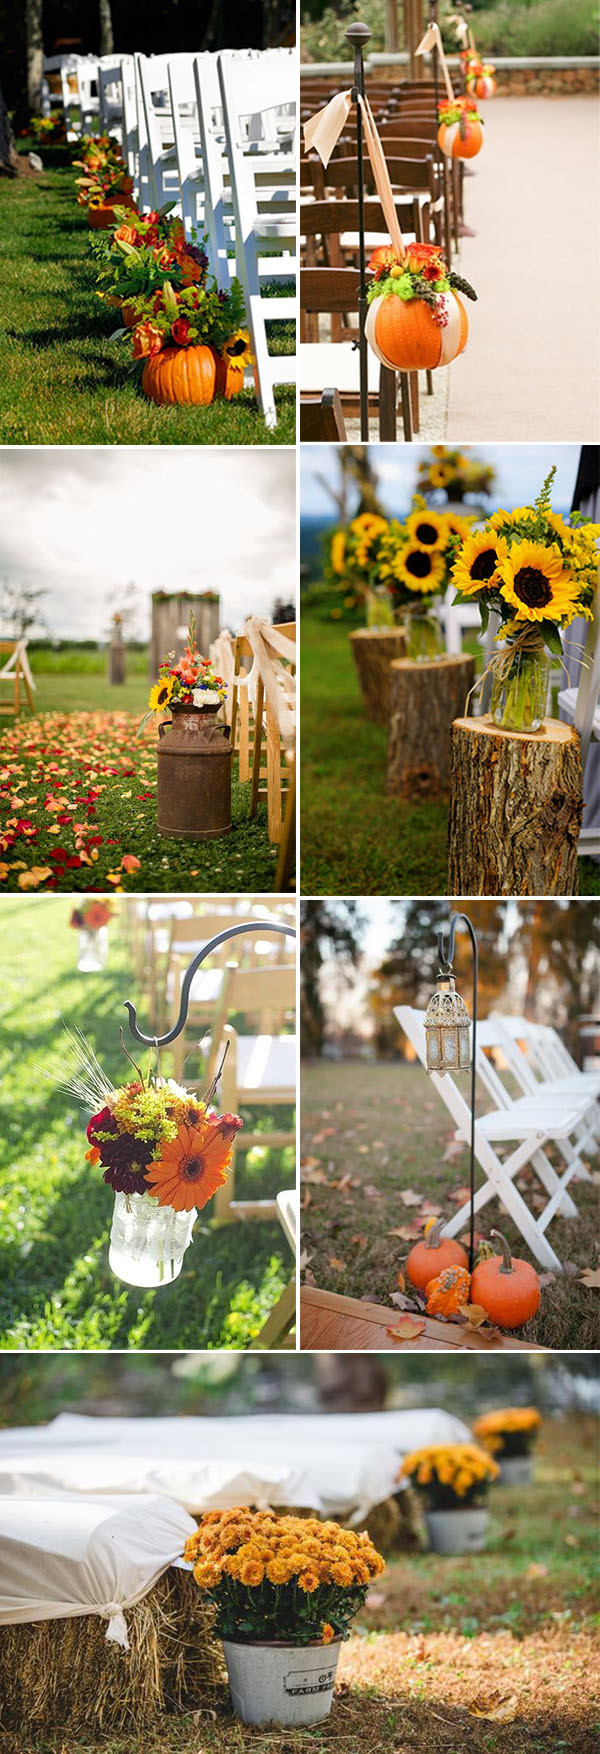 Fall Wedding Decorating Ideas
 Fall In Love With These 50 Great Fall Wedding Ideas